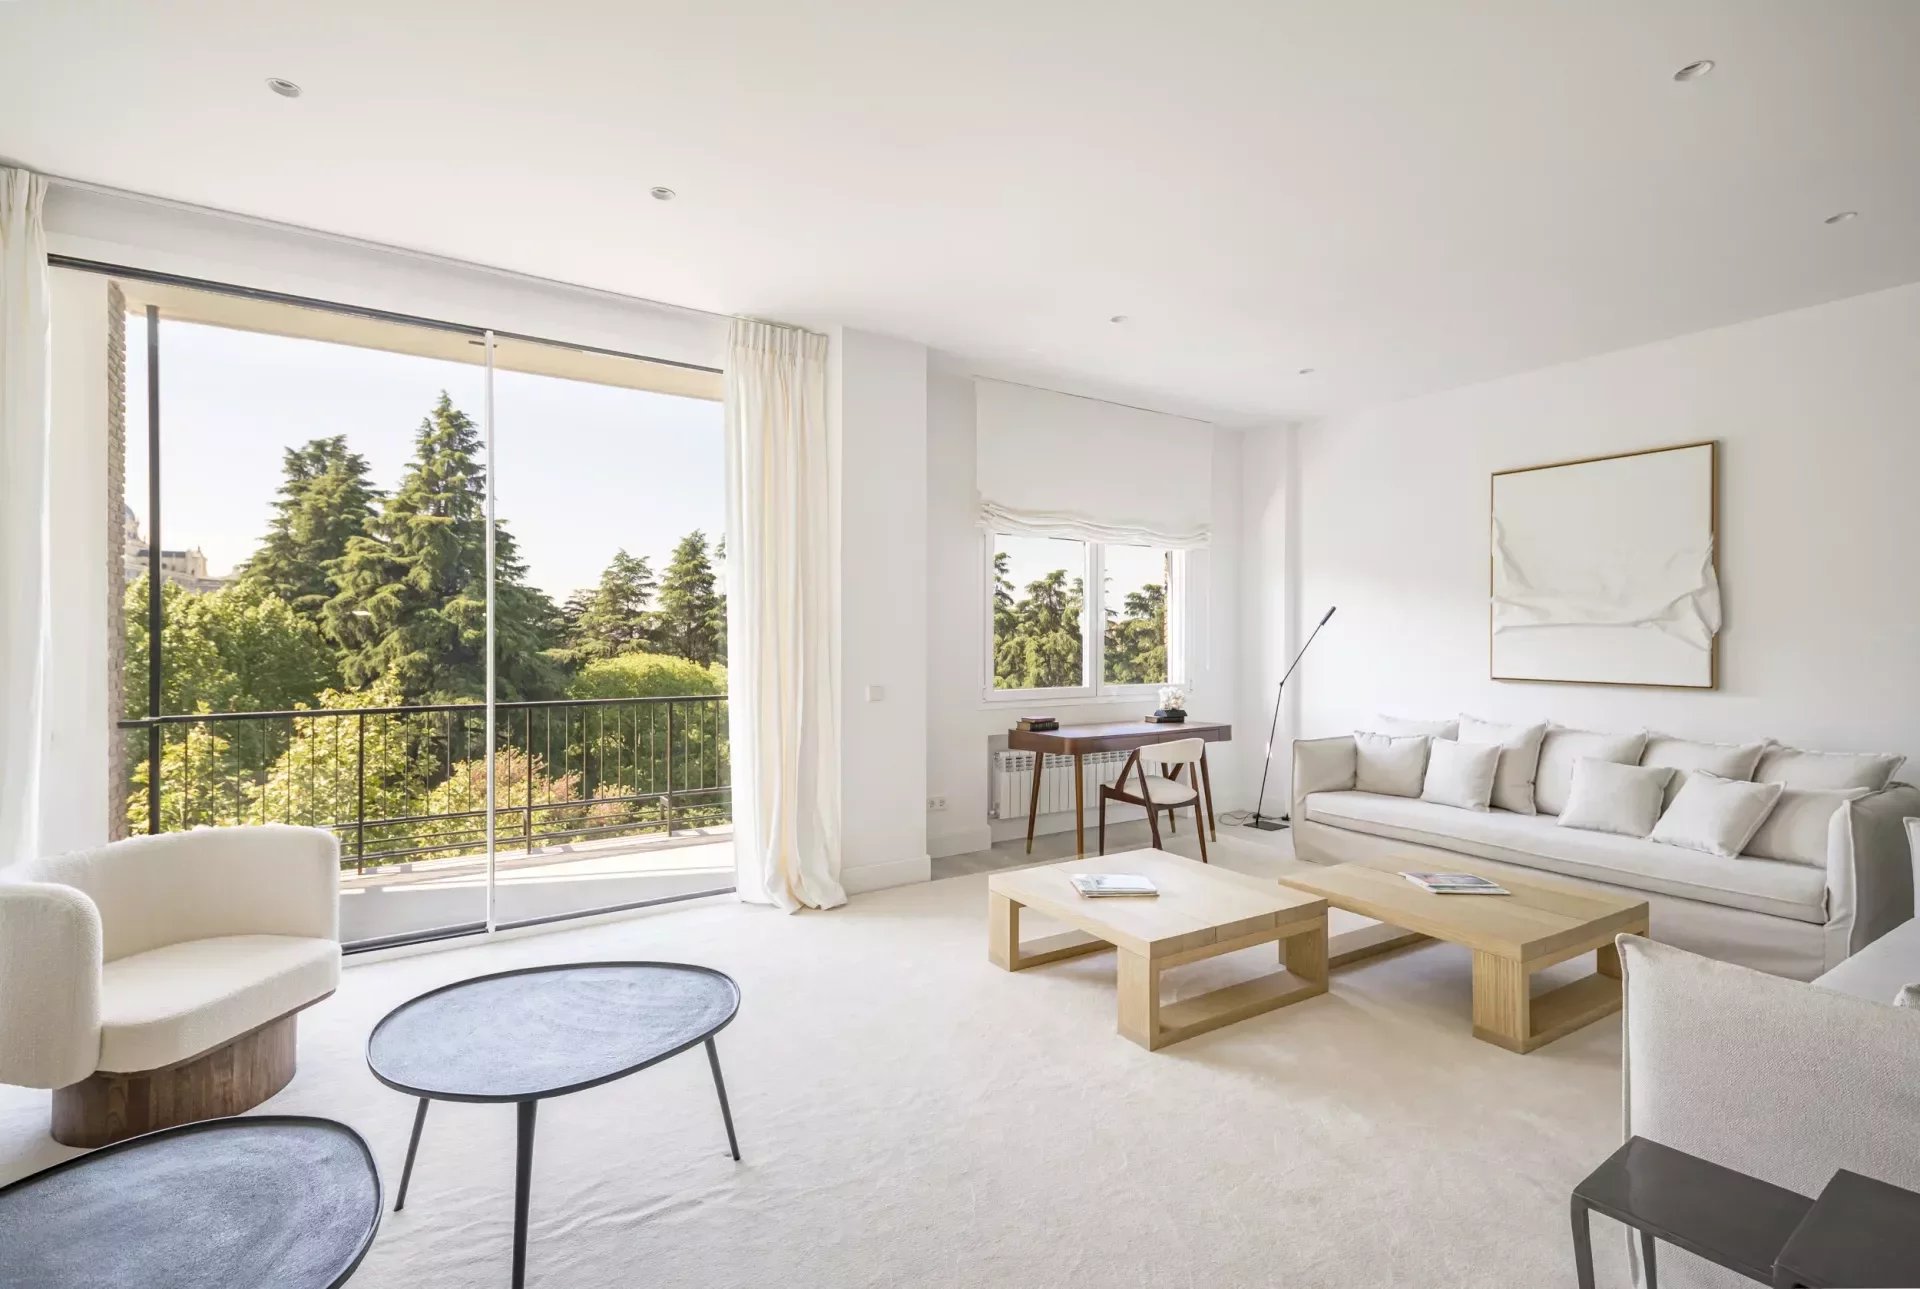 Madrid - Argüelles - Moncloa - Contemporary architecture with three en-suite bedrooms overlooking the Royal Palace.